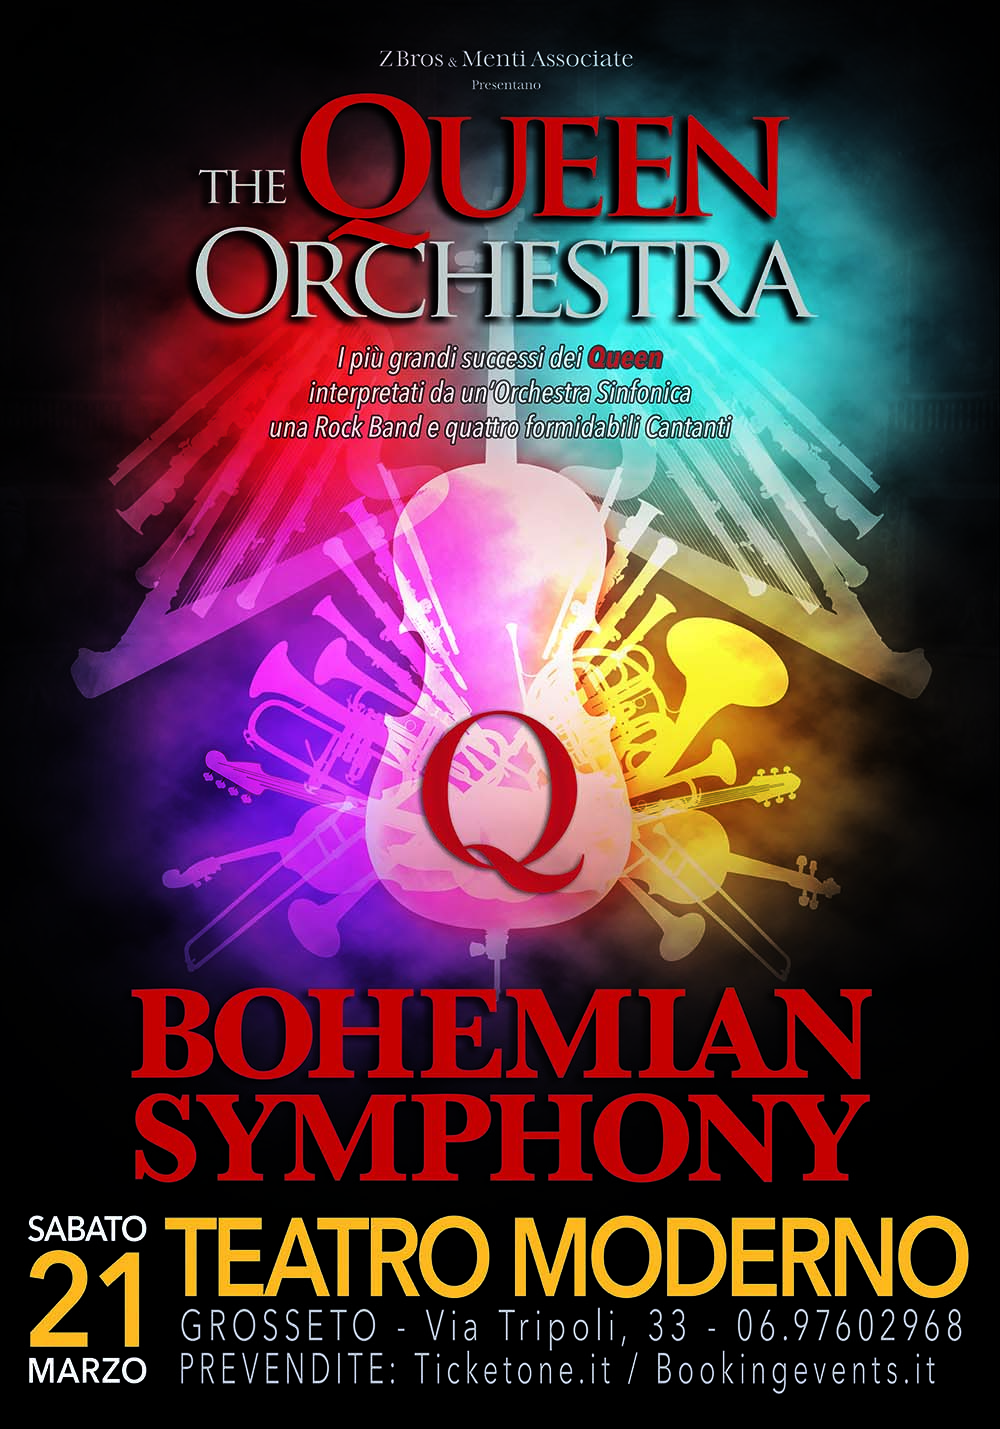 Bohemian Symphony The Queen Orchestra